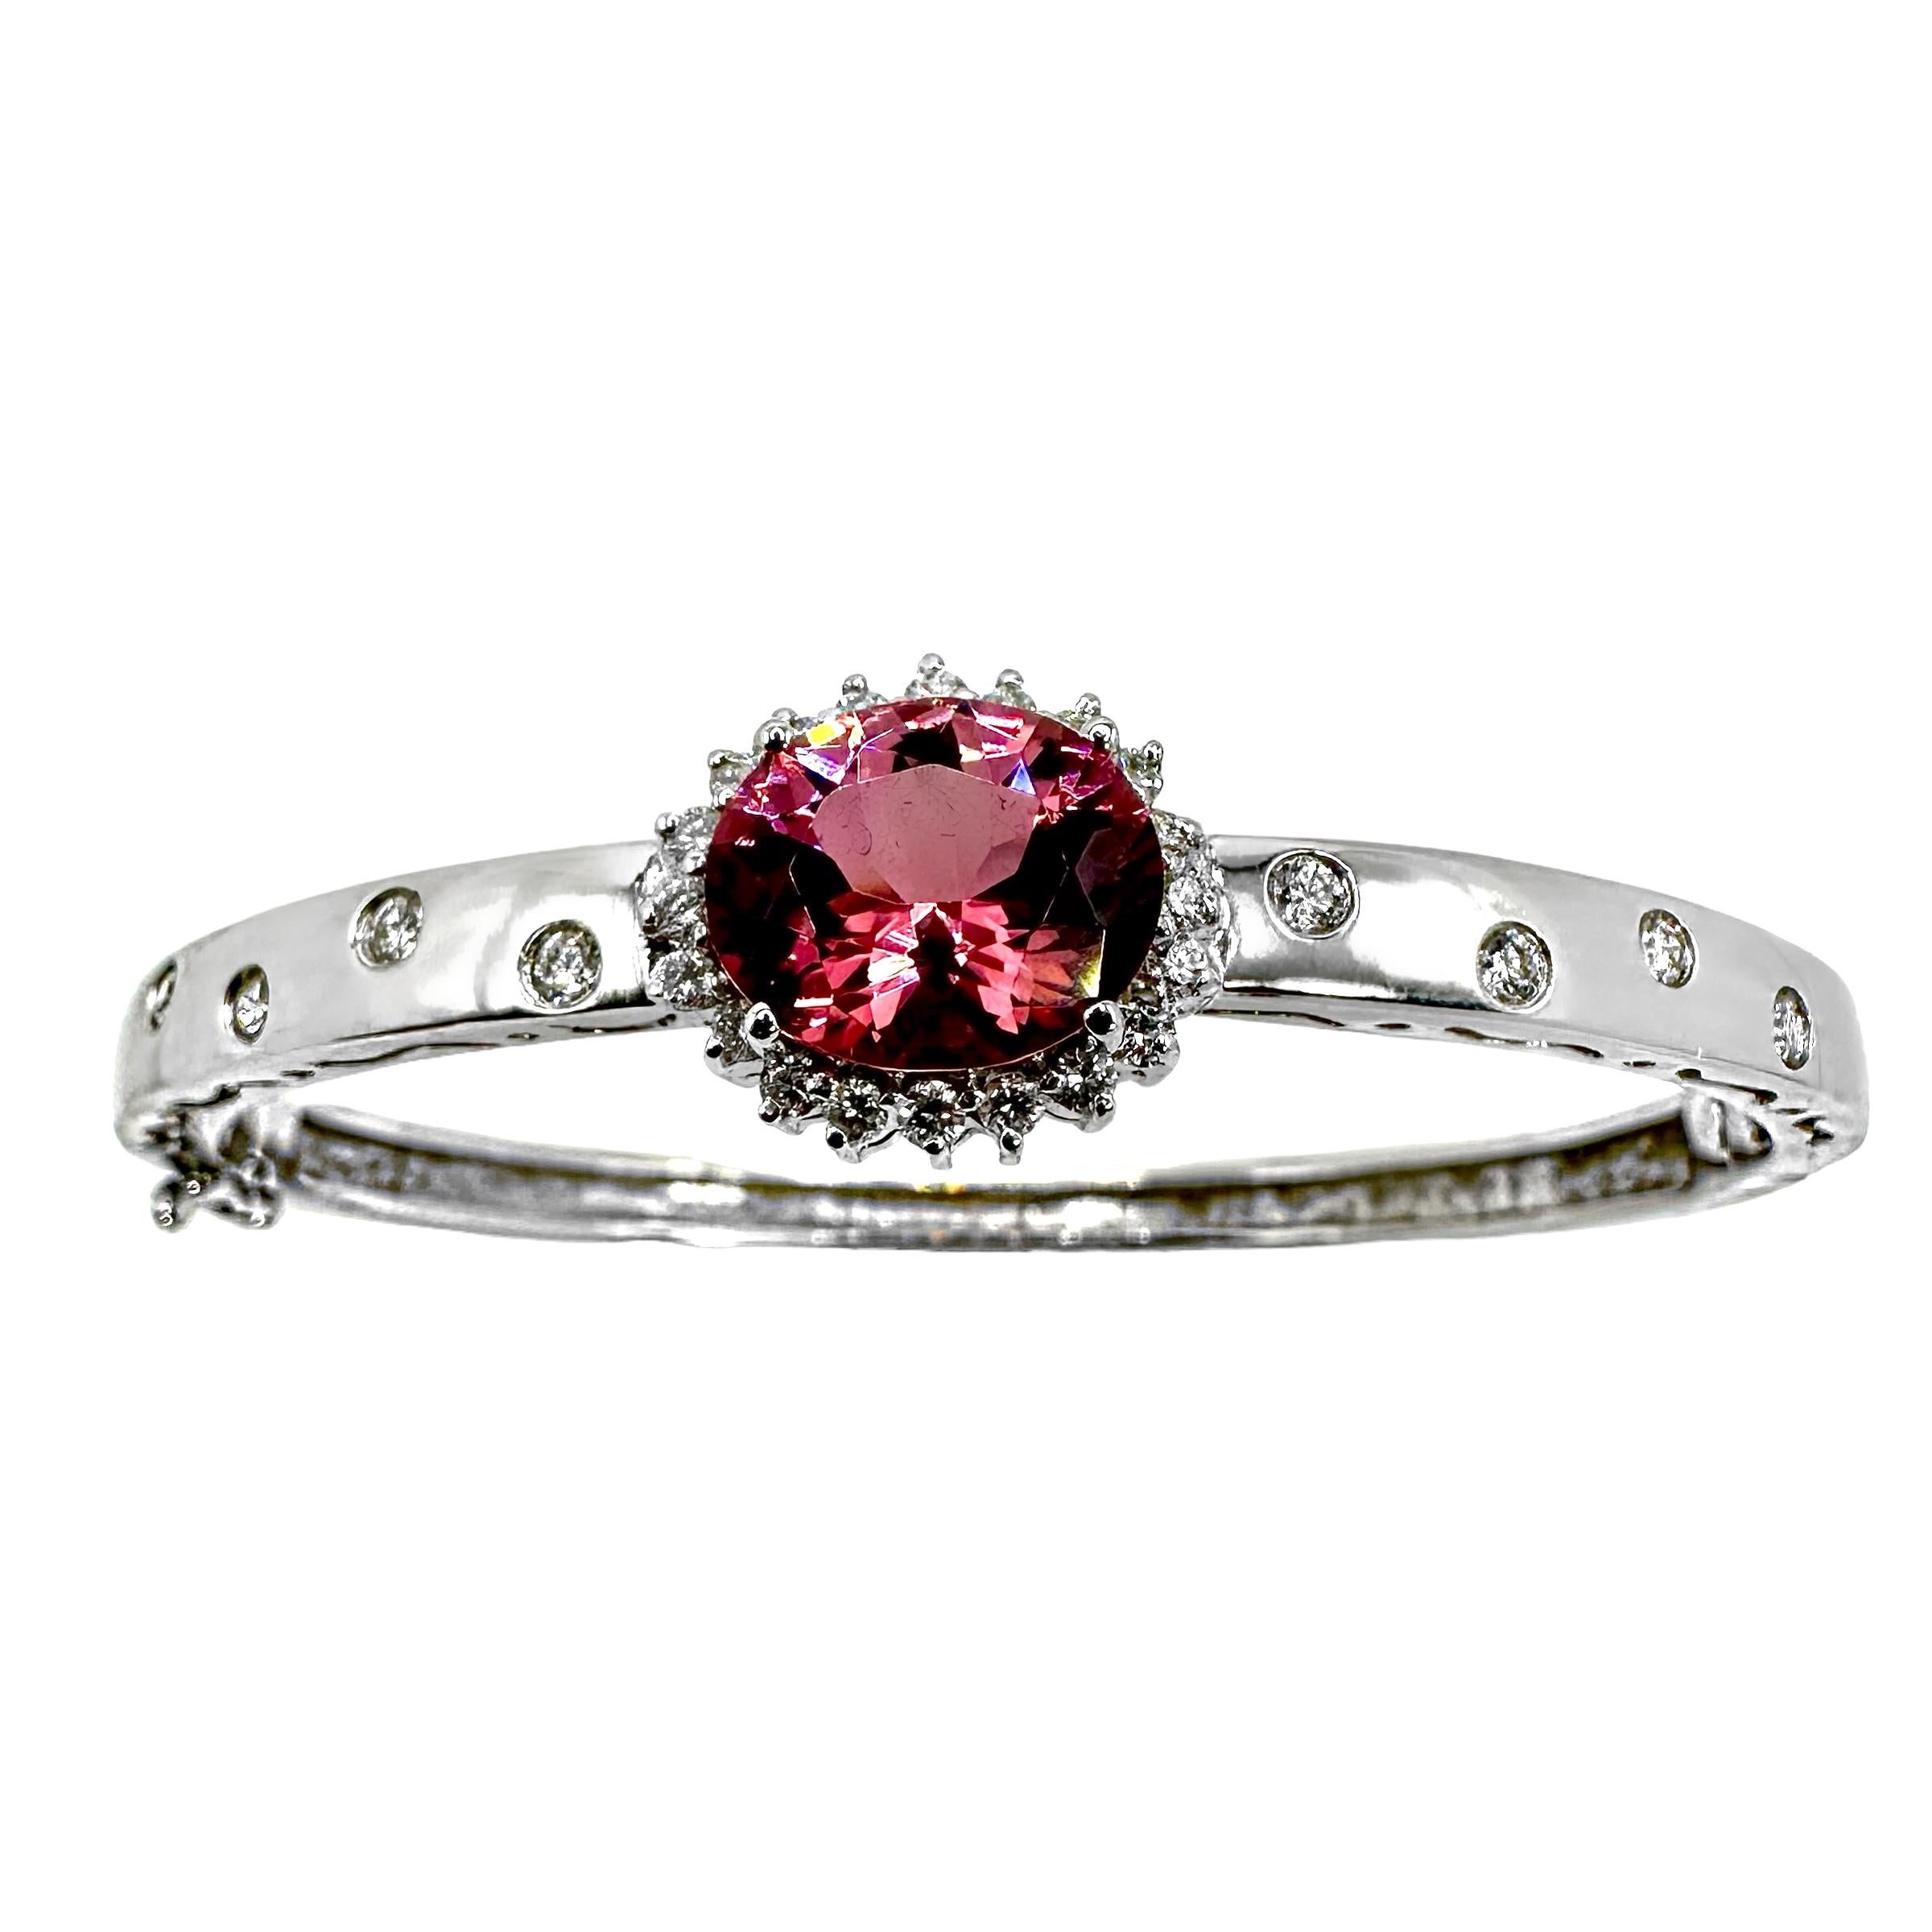 A lovely 18K white gold bangle featuring one oval shaped vibrant pink tourmaline surrounded by diamonds in a halo style setting in the center. In addition, each shoulder of this bracelet is burnished with 4 diamonds inset. The top and bottom of the